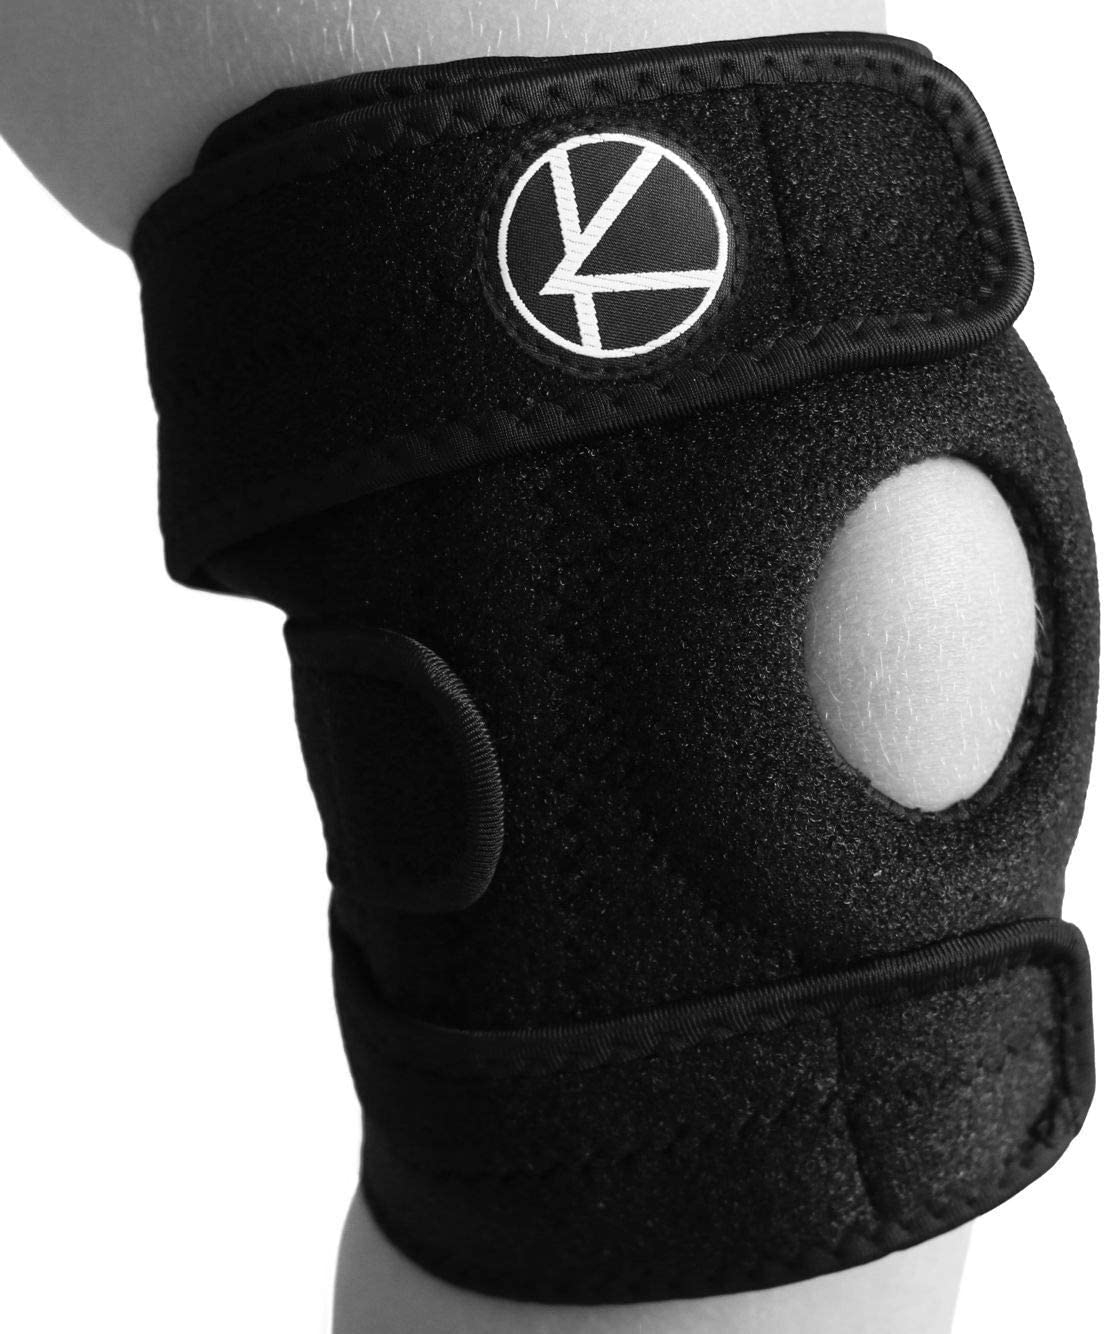 KARM Adjustable Kids Knee Brace Support - Knee Support for Youth, Arthritis,  ACL, MCL, LCL, Sports Exercise, Meniscus Tear, Dance. Open Patella Neoprene  Stabilizer Wrap for Children, Boys, Girls (Black) One Size